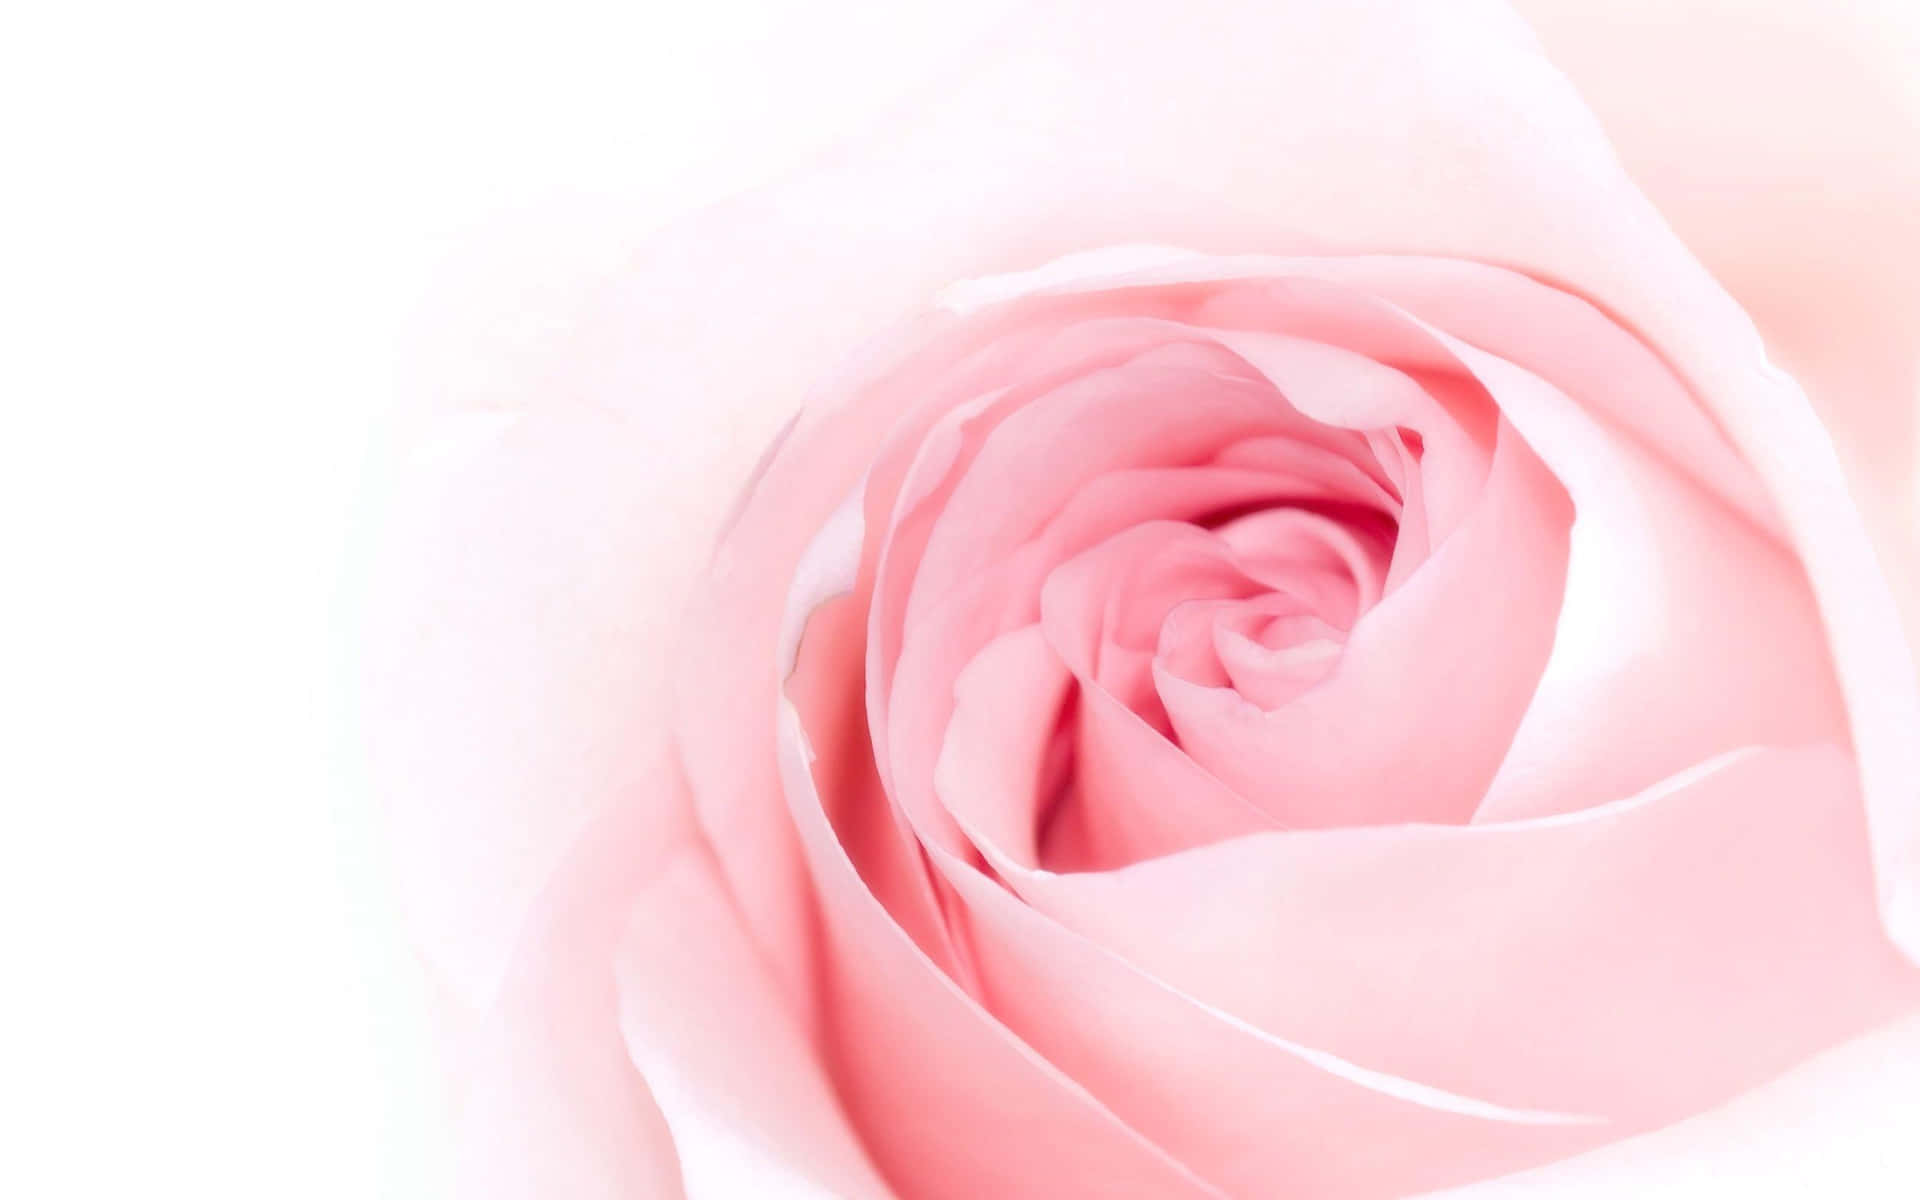 A soothing soft pink background